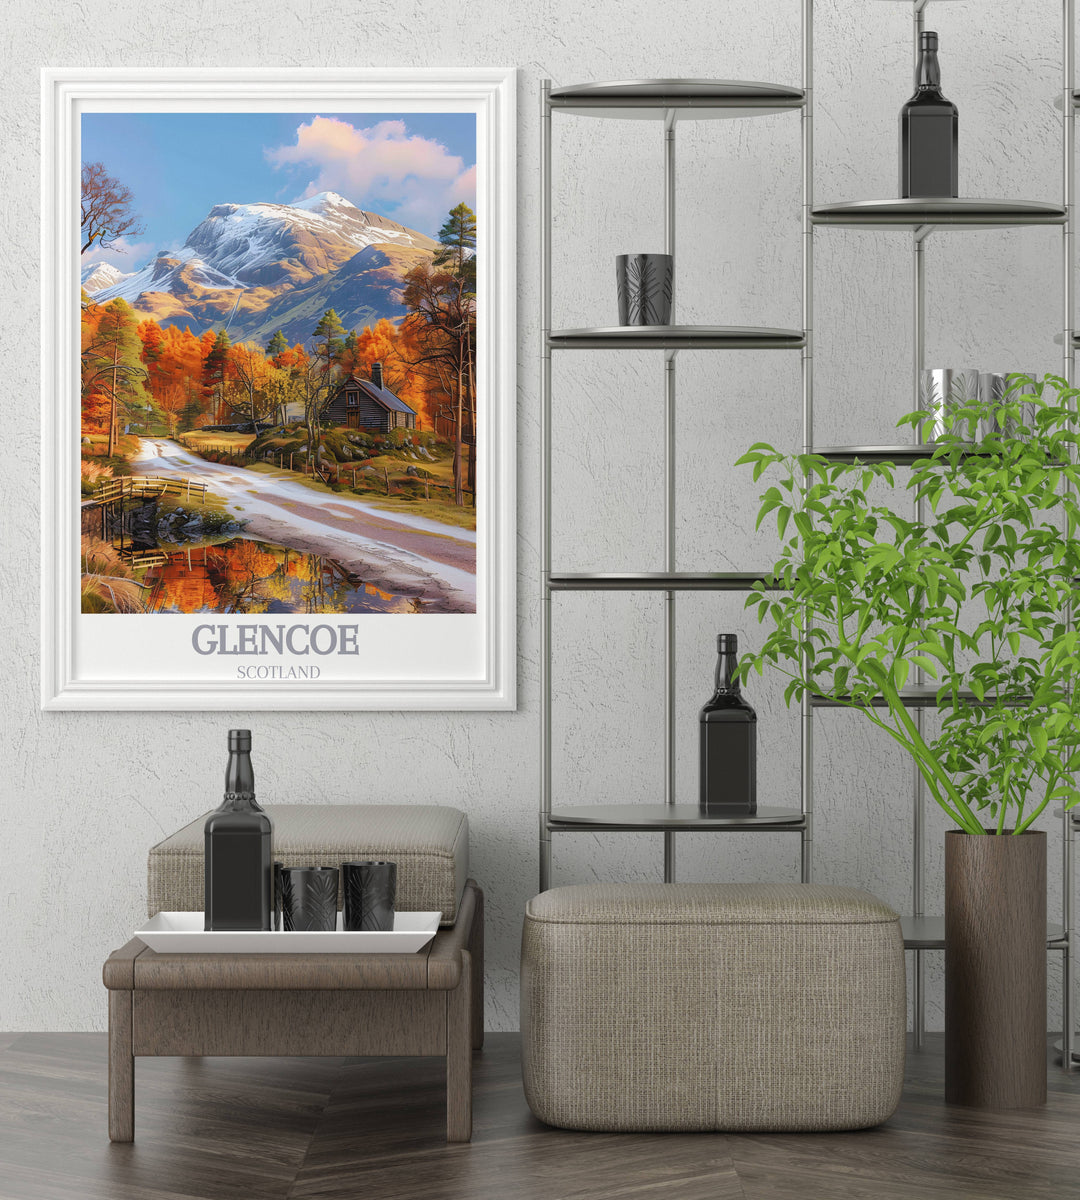 A breathtaking depiction of Glencoe Scottish landscapes, this print captures the untamed beauty and mystery of the highlands.